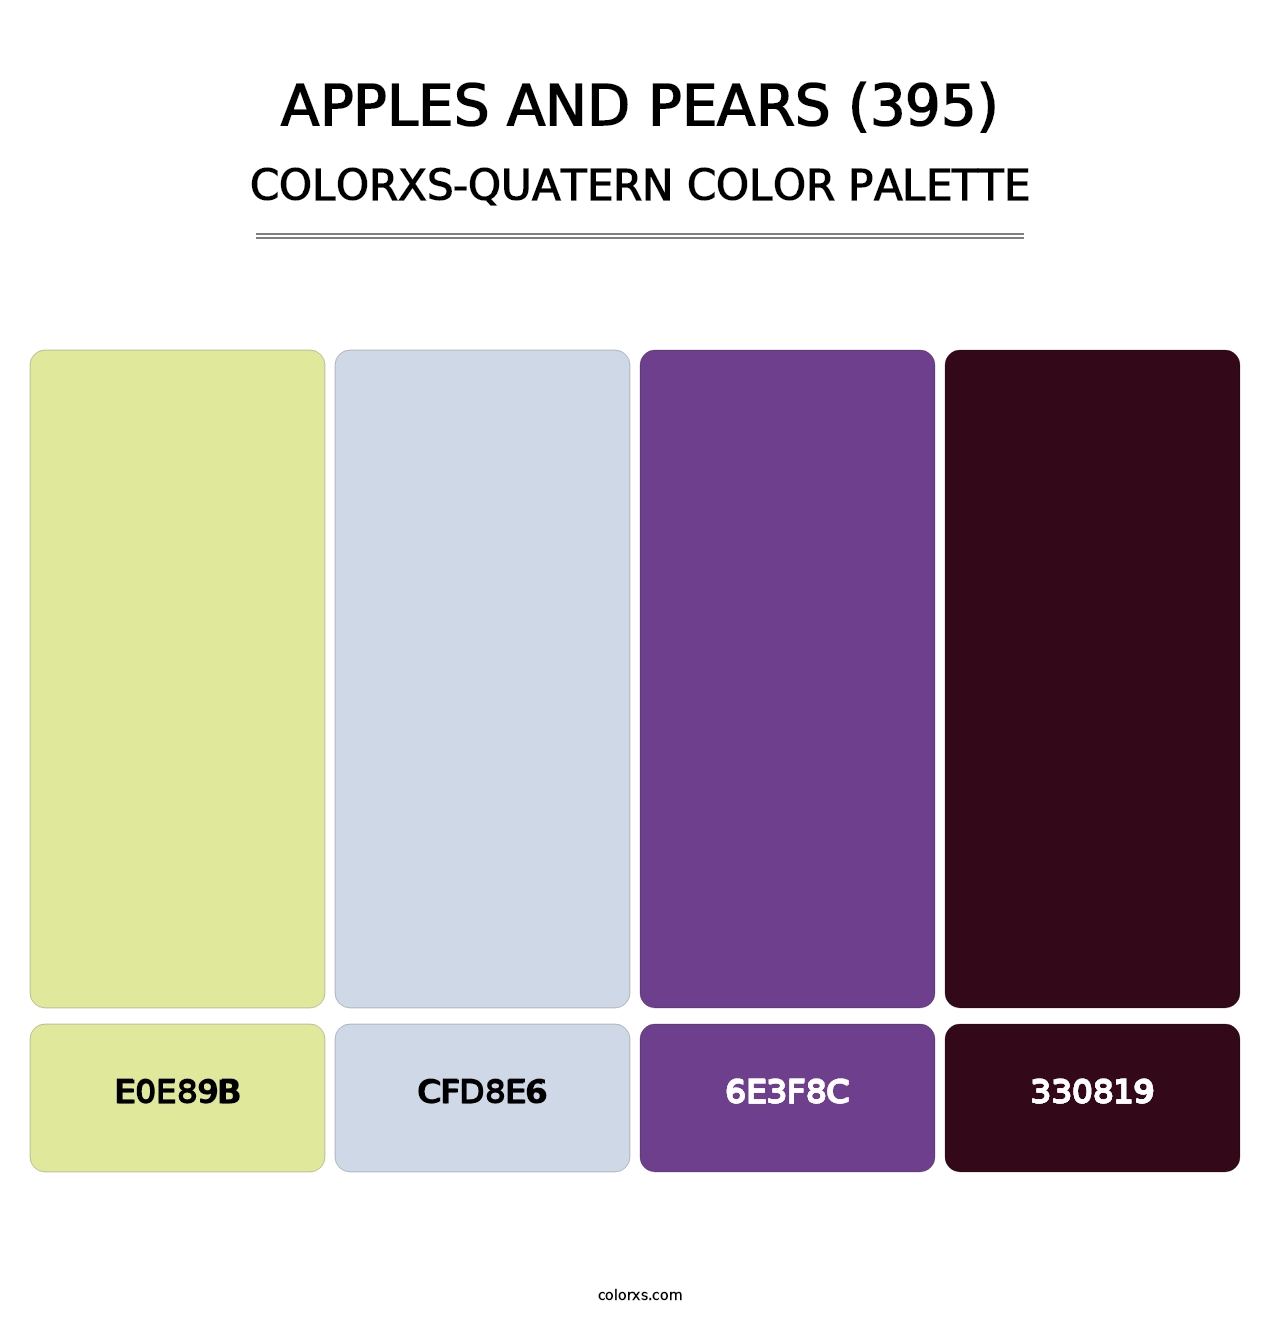 Apples and Pears (395) - Colorxs Quatern Palette